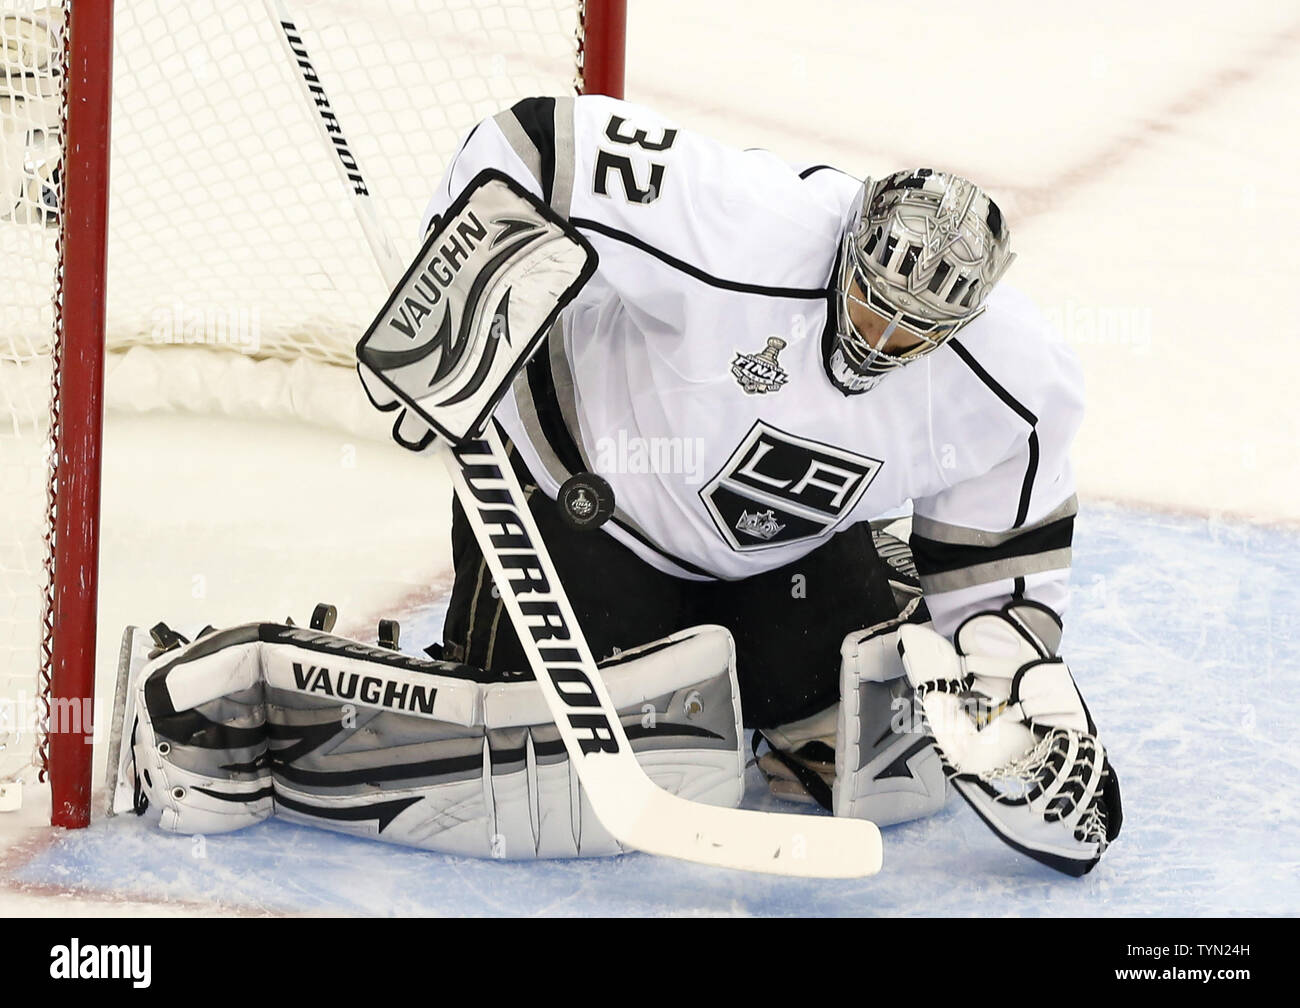 Los Angeles Kings goaltender Jonathan Quick makes a glove save on